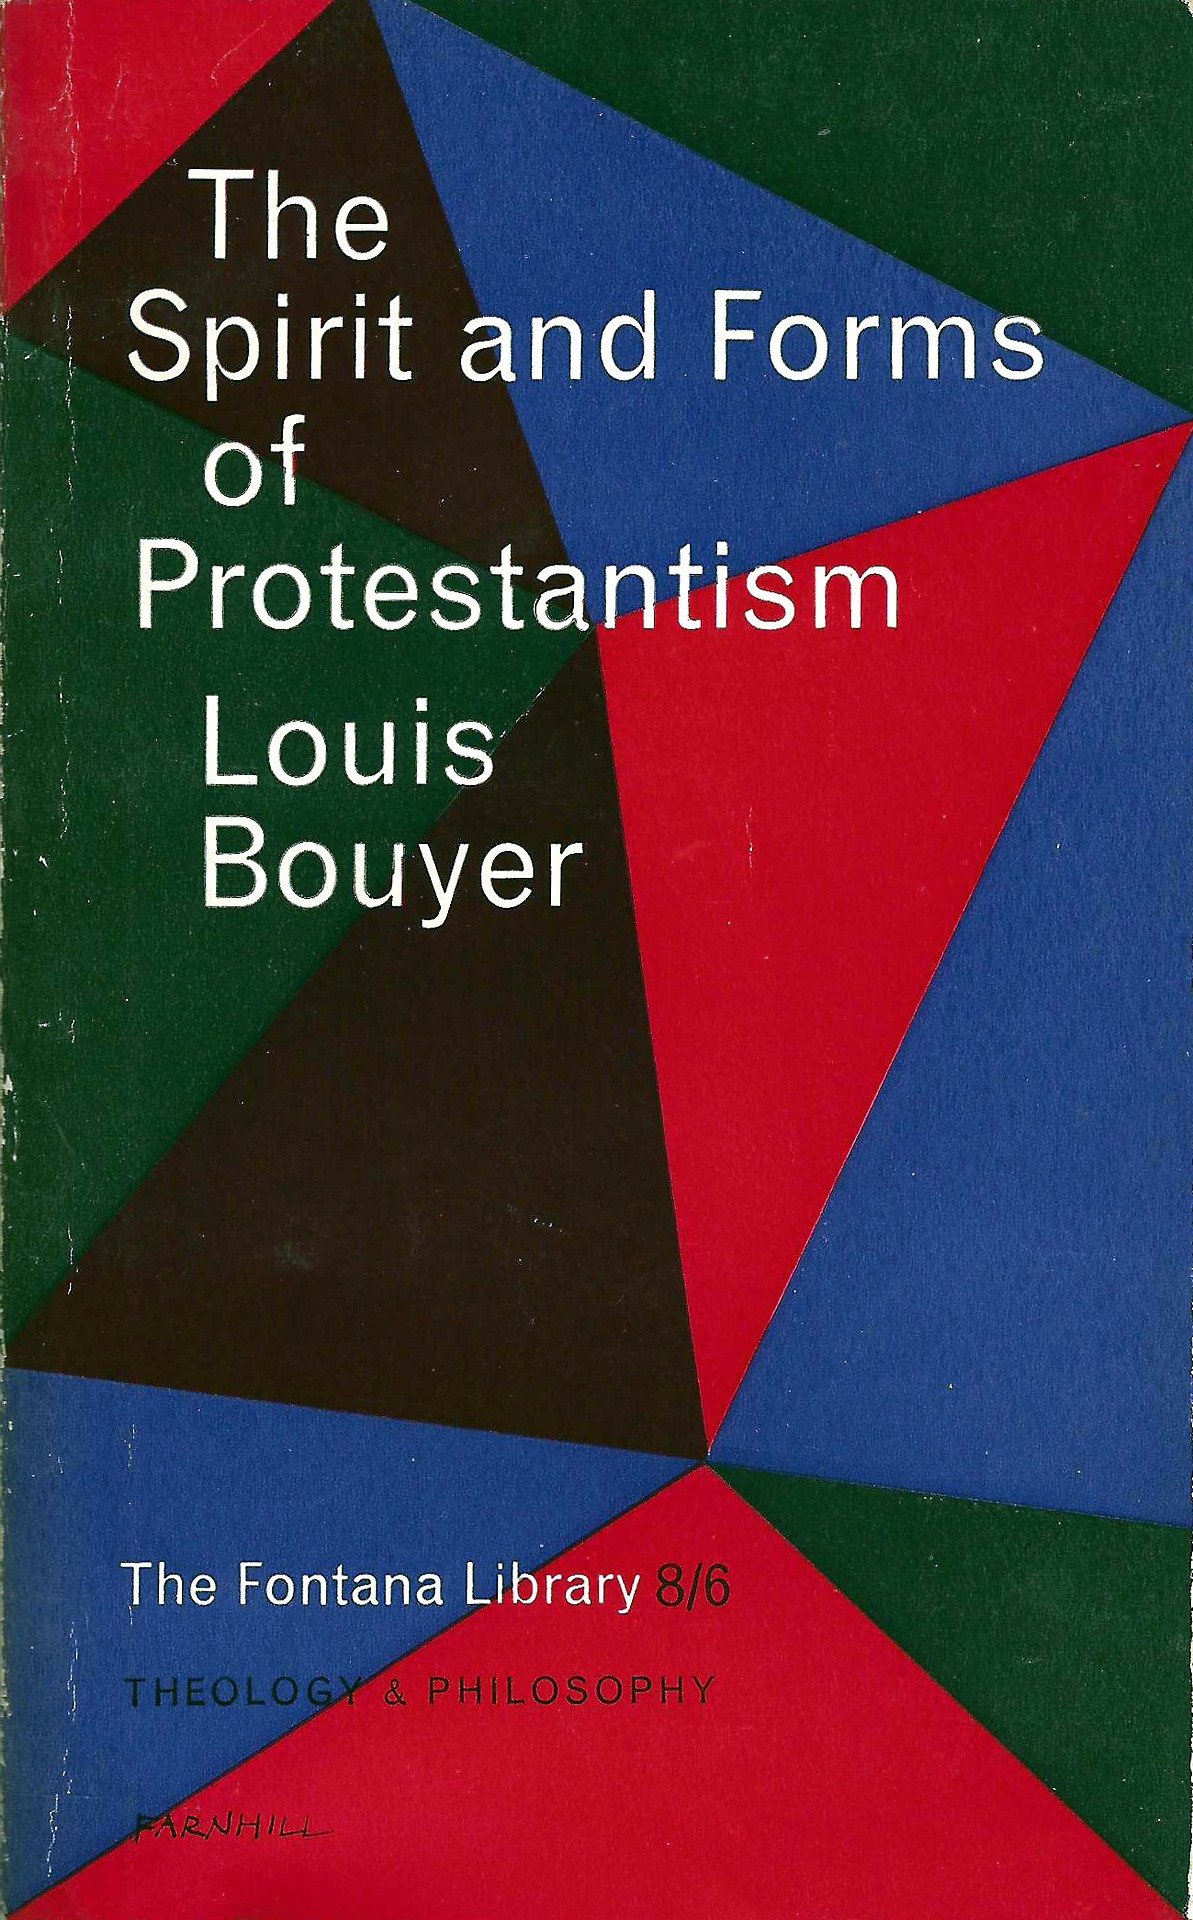 Finished #reading: The Spirit and Forms of Protestantism, by Louis Bouyer.
A real mixed bag, this. Fr Bouyer was a convert to Catholicism, having previously been a Lutheran minister. His book sets out to demonstrate two things: how the “positive...